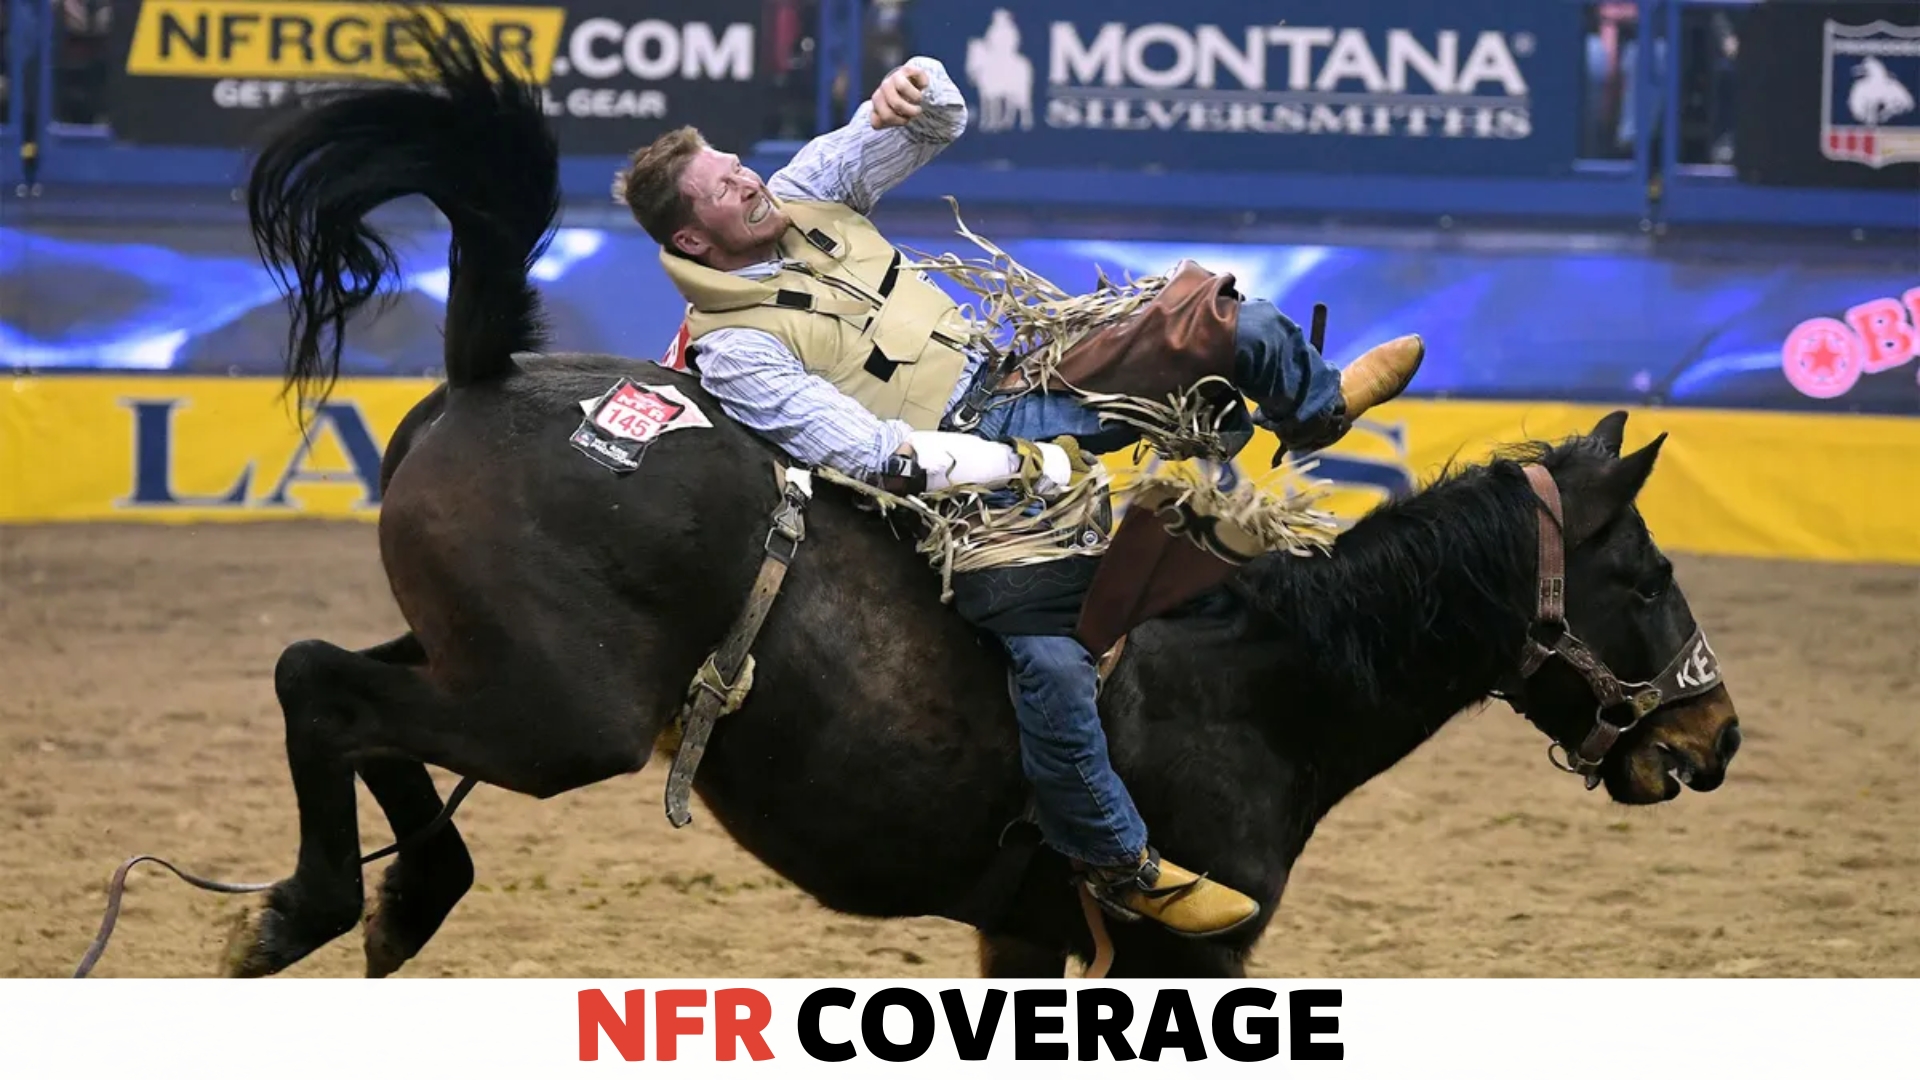 How Much Are NFR Tickets? NFRCoverage